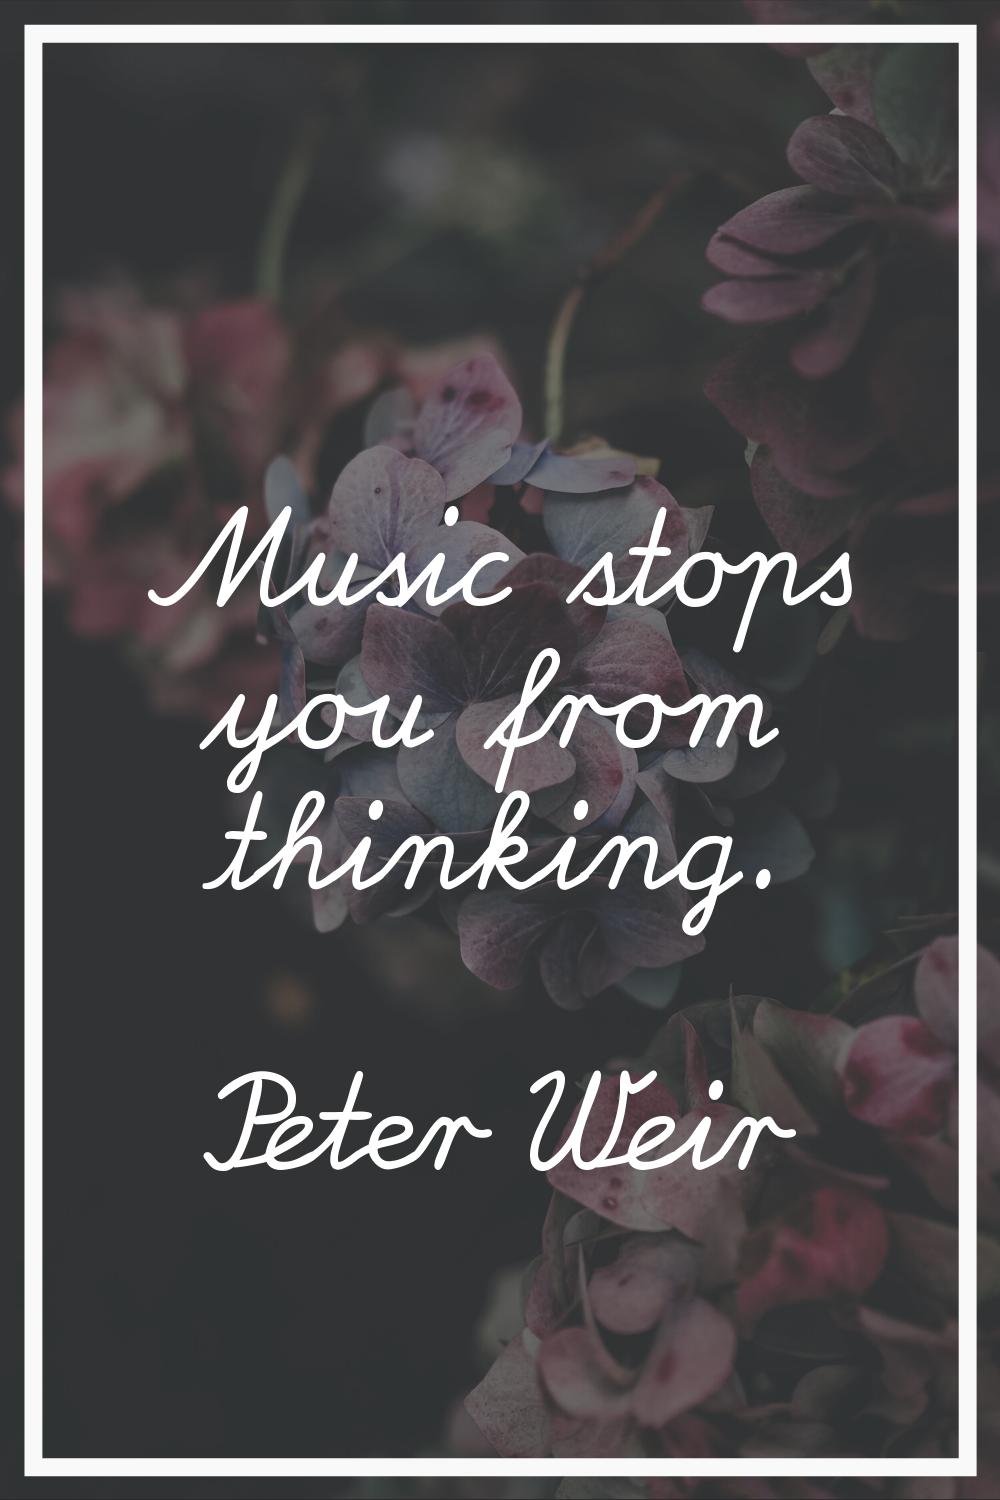 Music stops you from thinking.